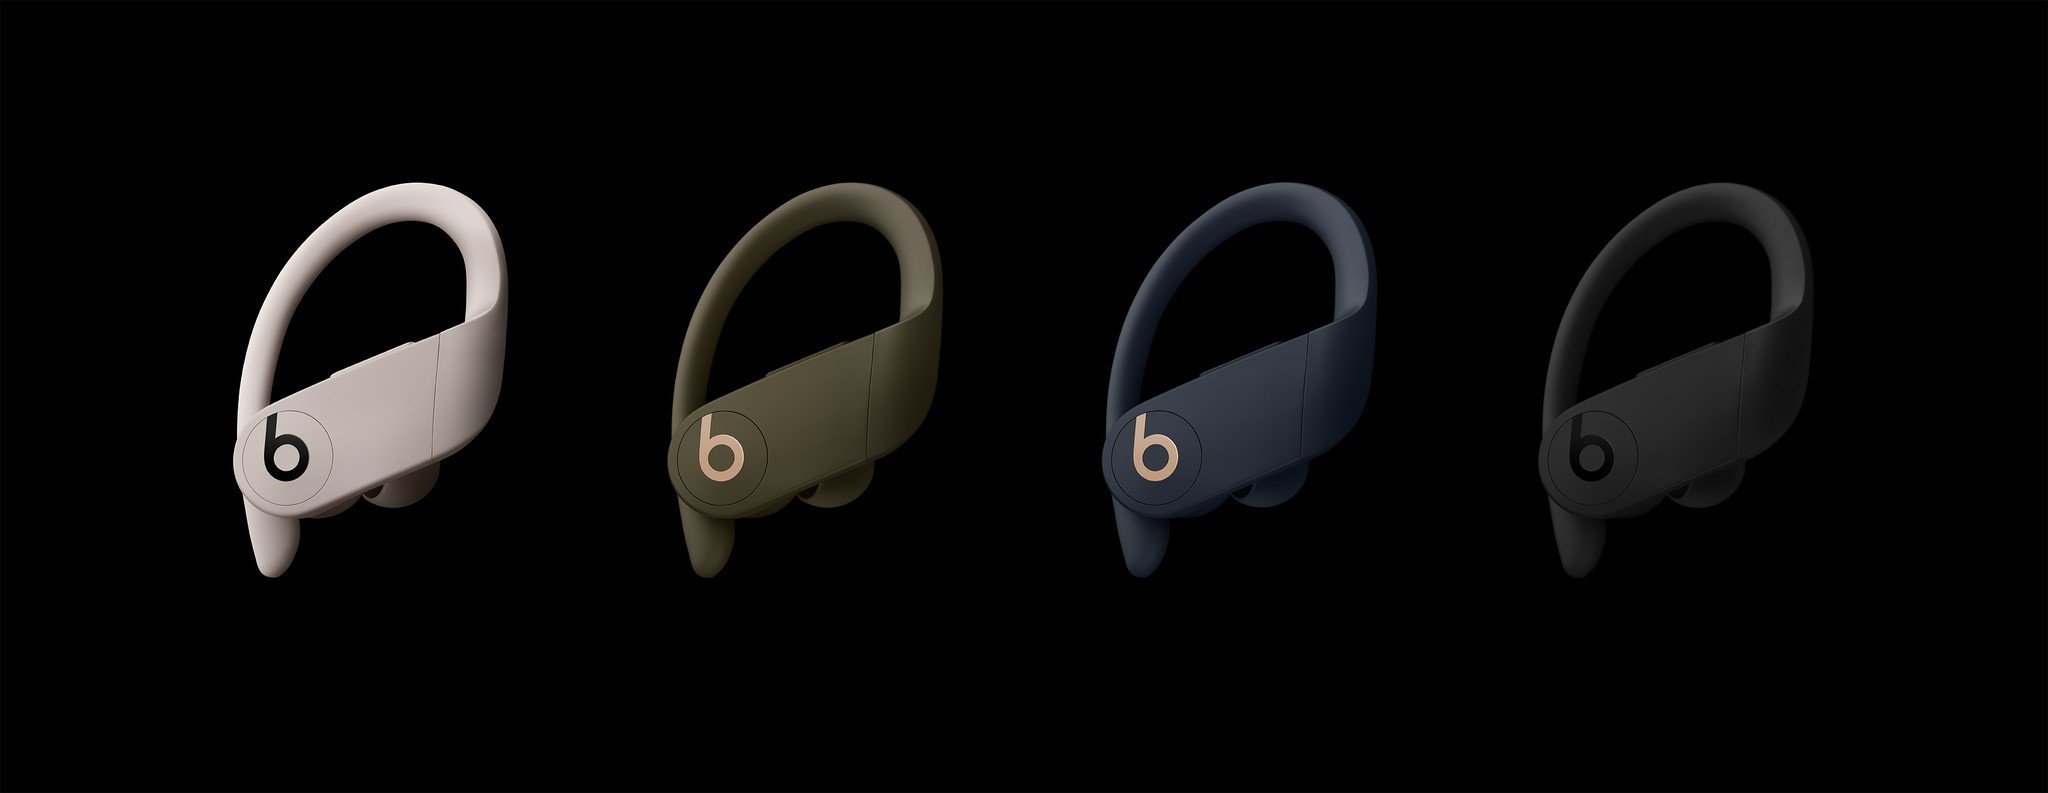 when are white powerbeats pro coming out